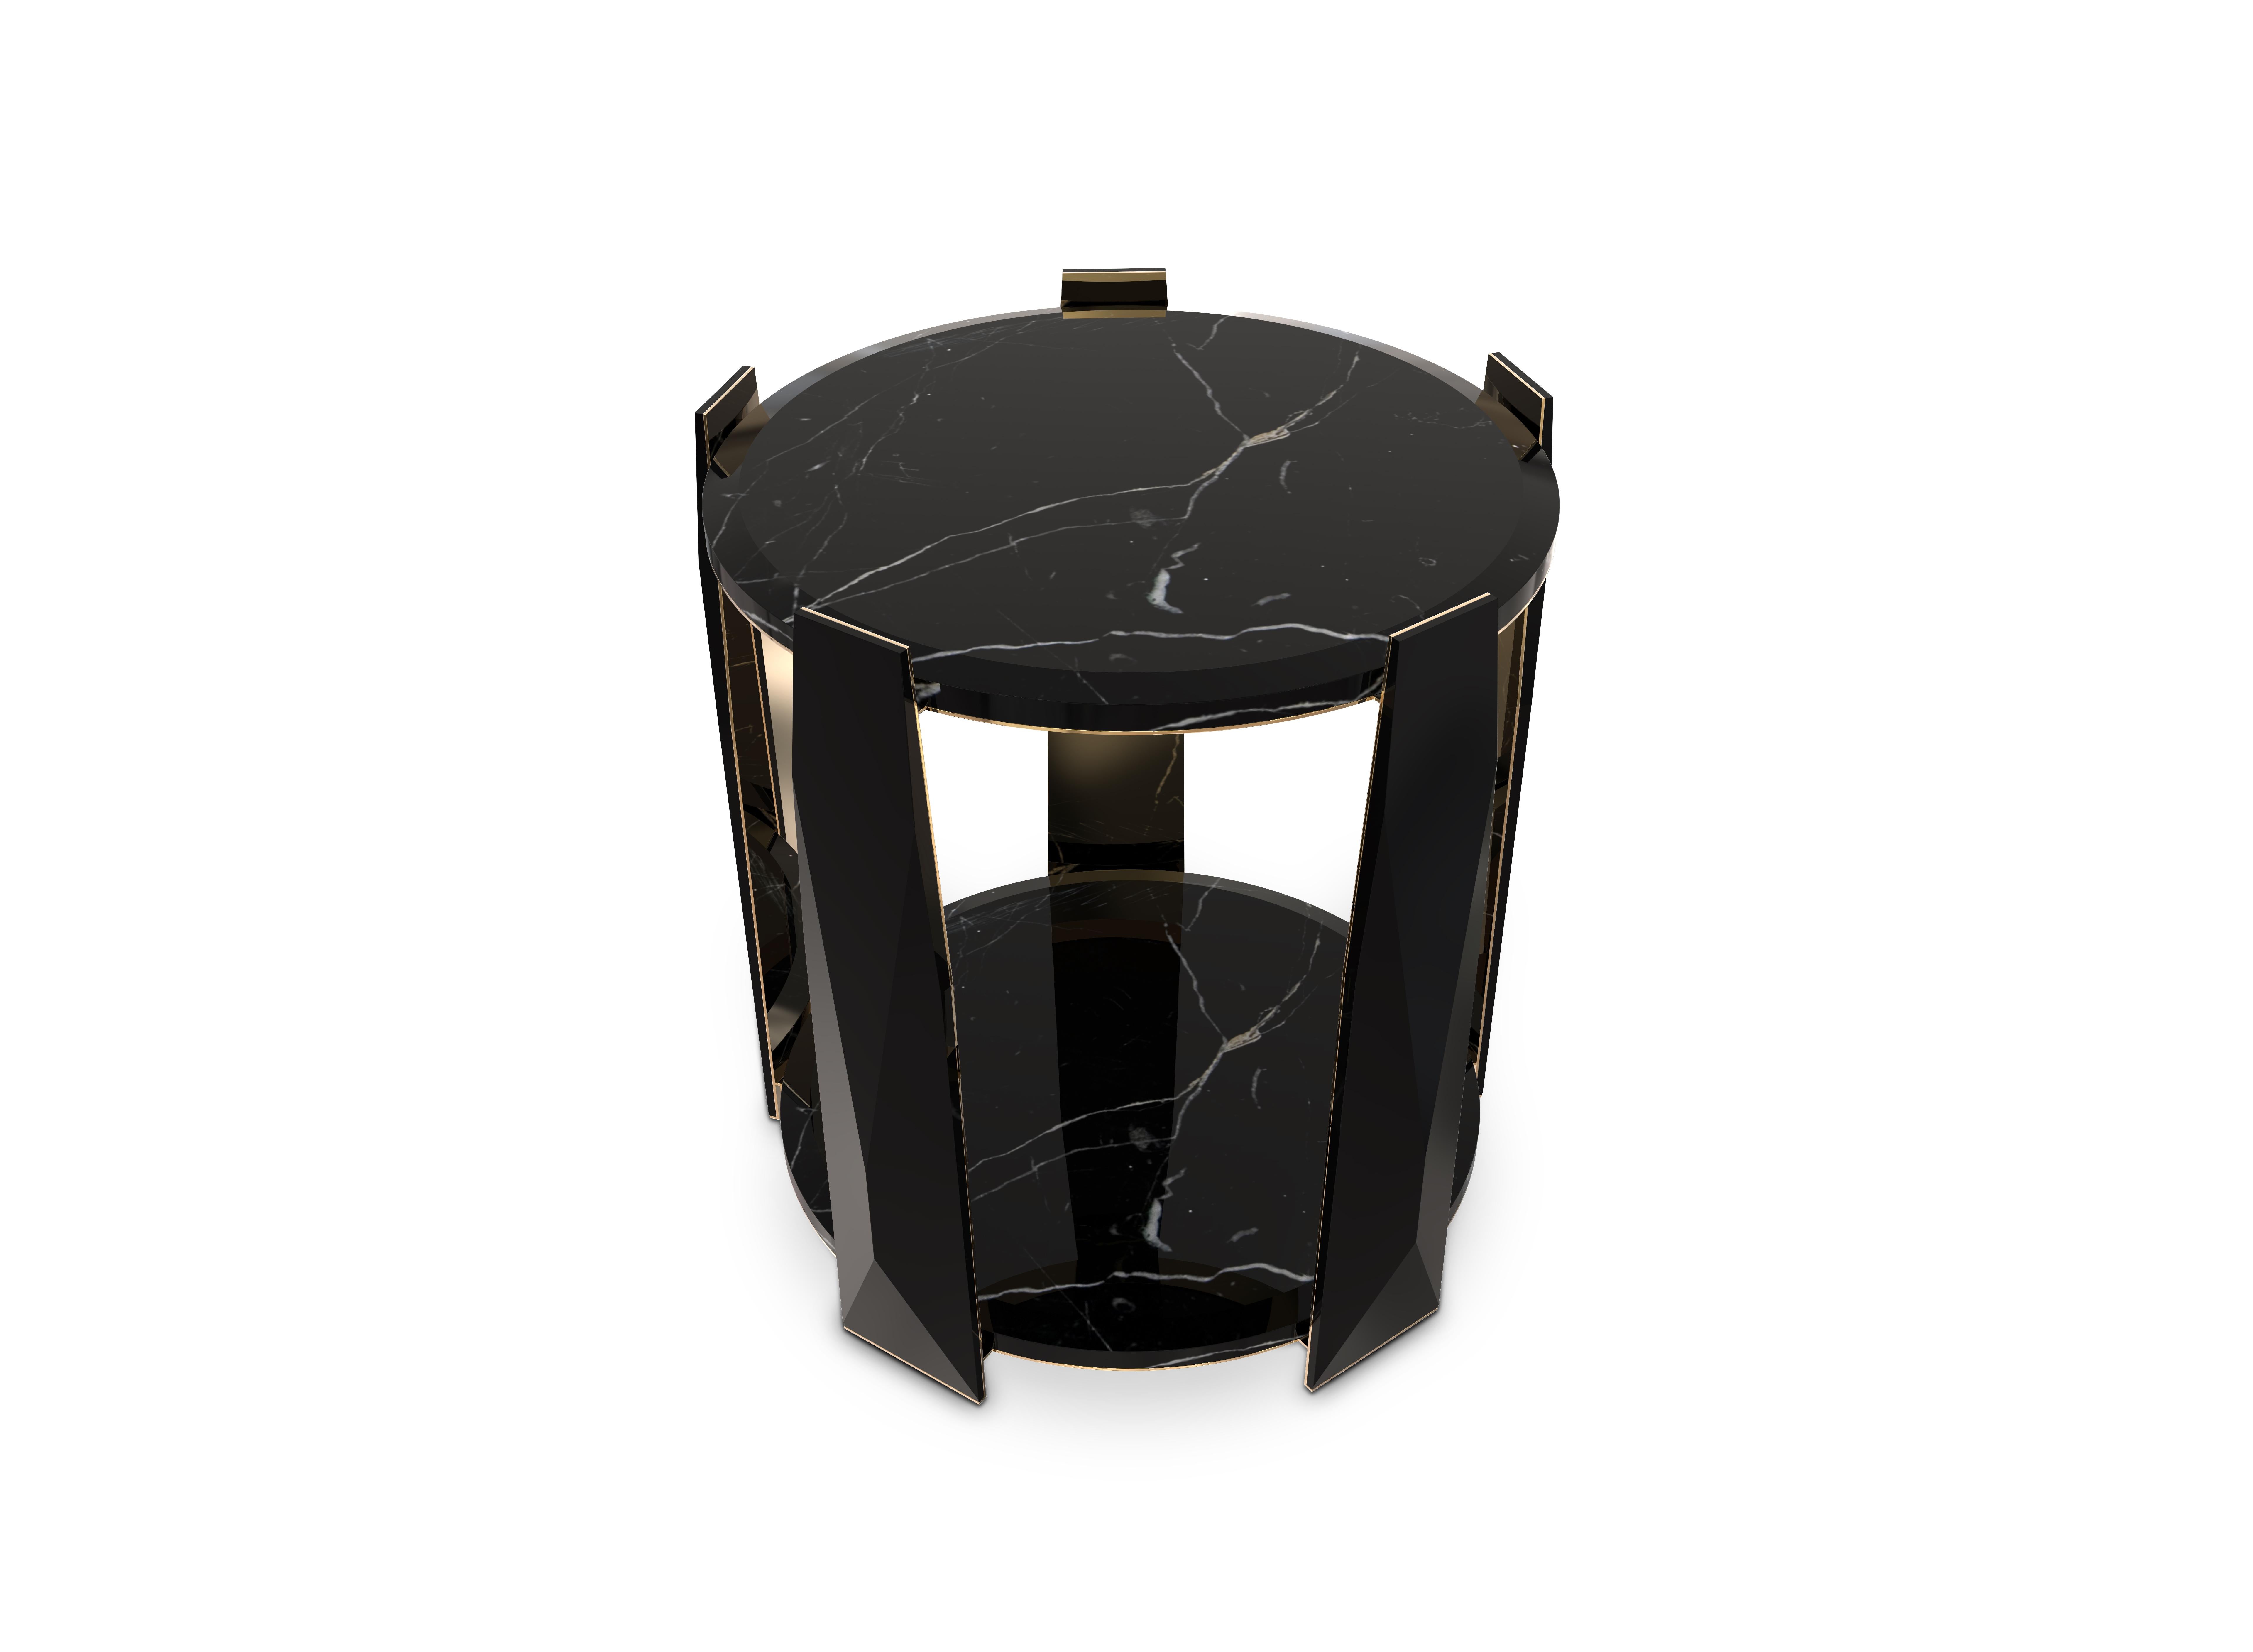 The Imperium side table draws its inspiration from the classical lines of dramatic castles and great city walls, reminding us of opulent crowns. A lacquered wood structure embellished with gold plated brass and Nero Marquina marble. Being a strong